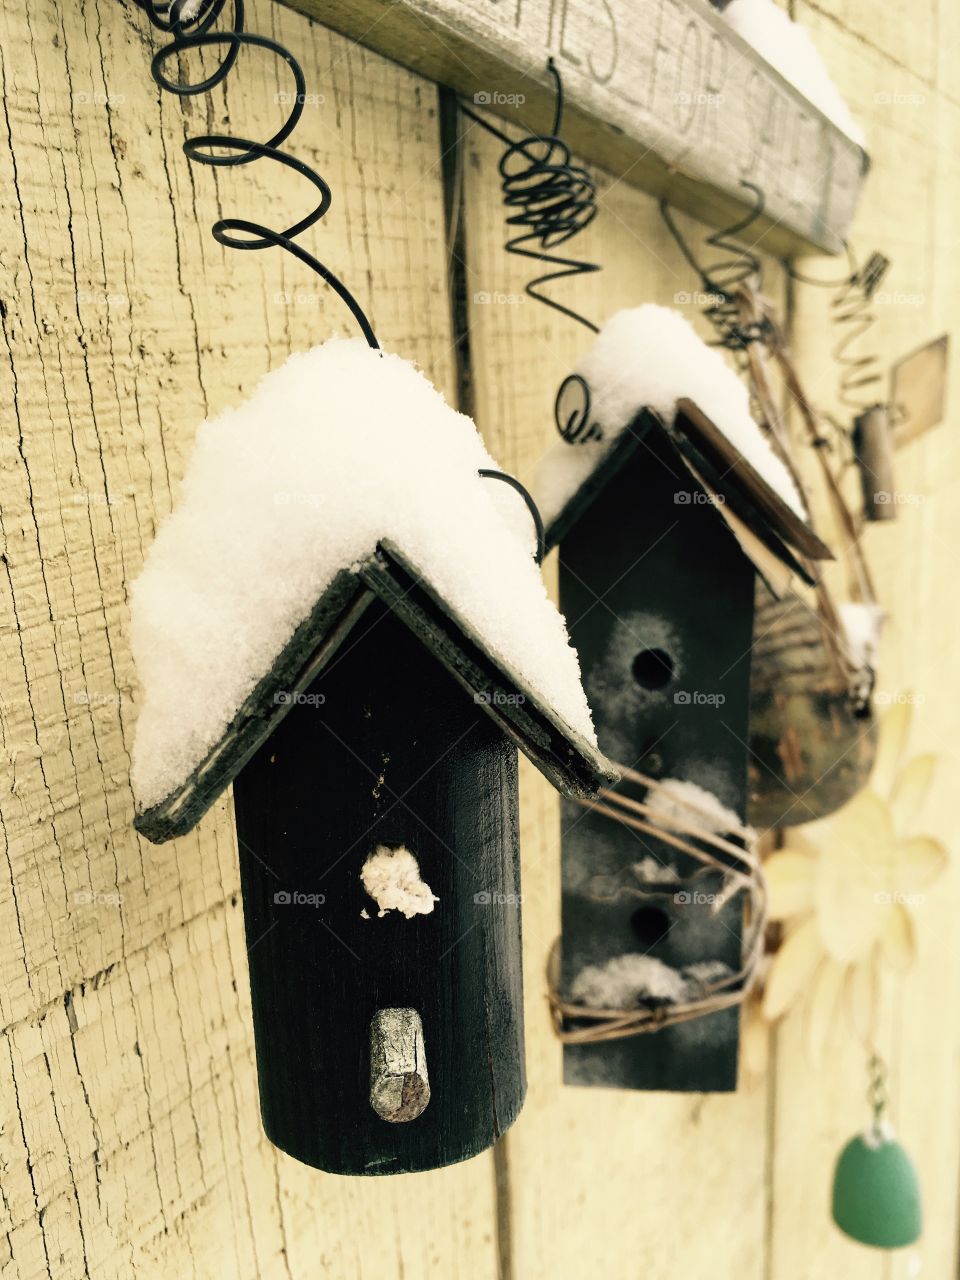 Tiny little fake bird houses against the shed wall... even they had snow on top